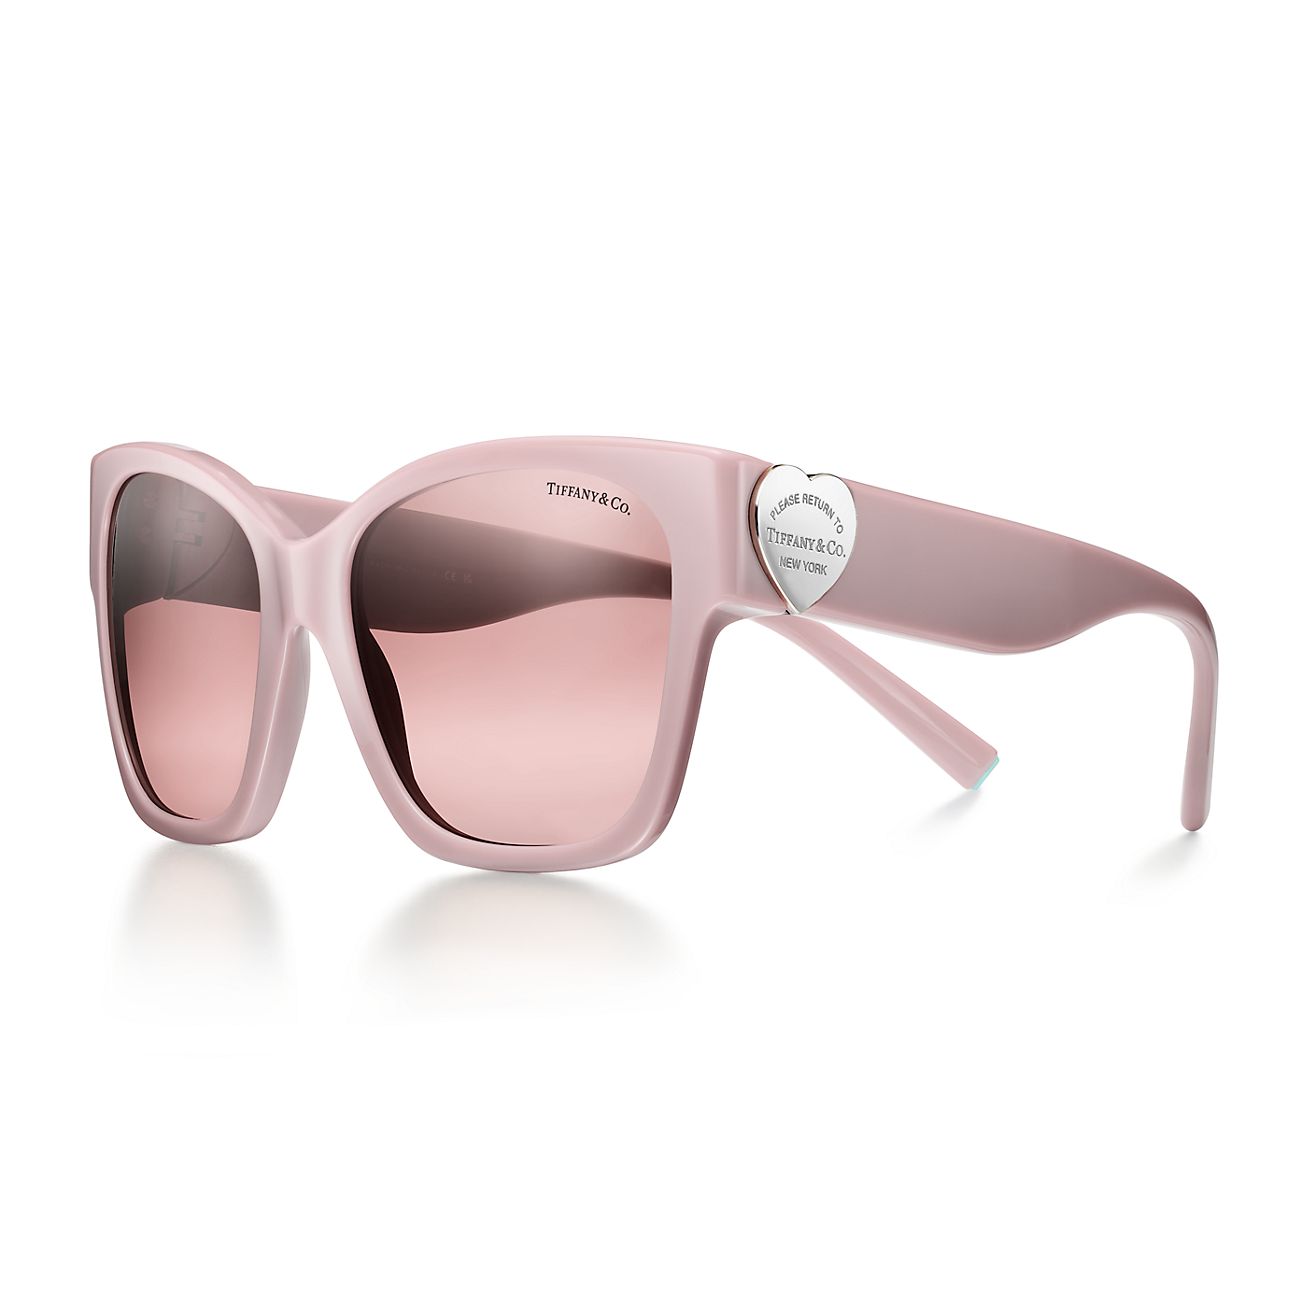 Return to Tiffany Sunglasses in Dusty Pink Acetate with Pink Gradient Lenses